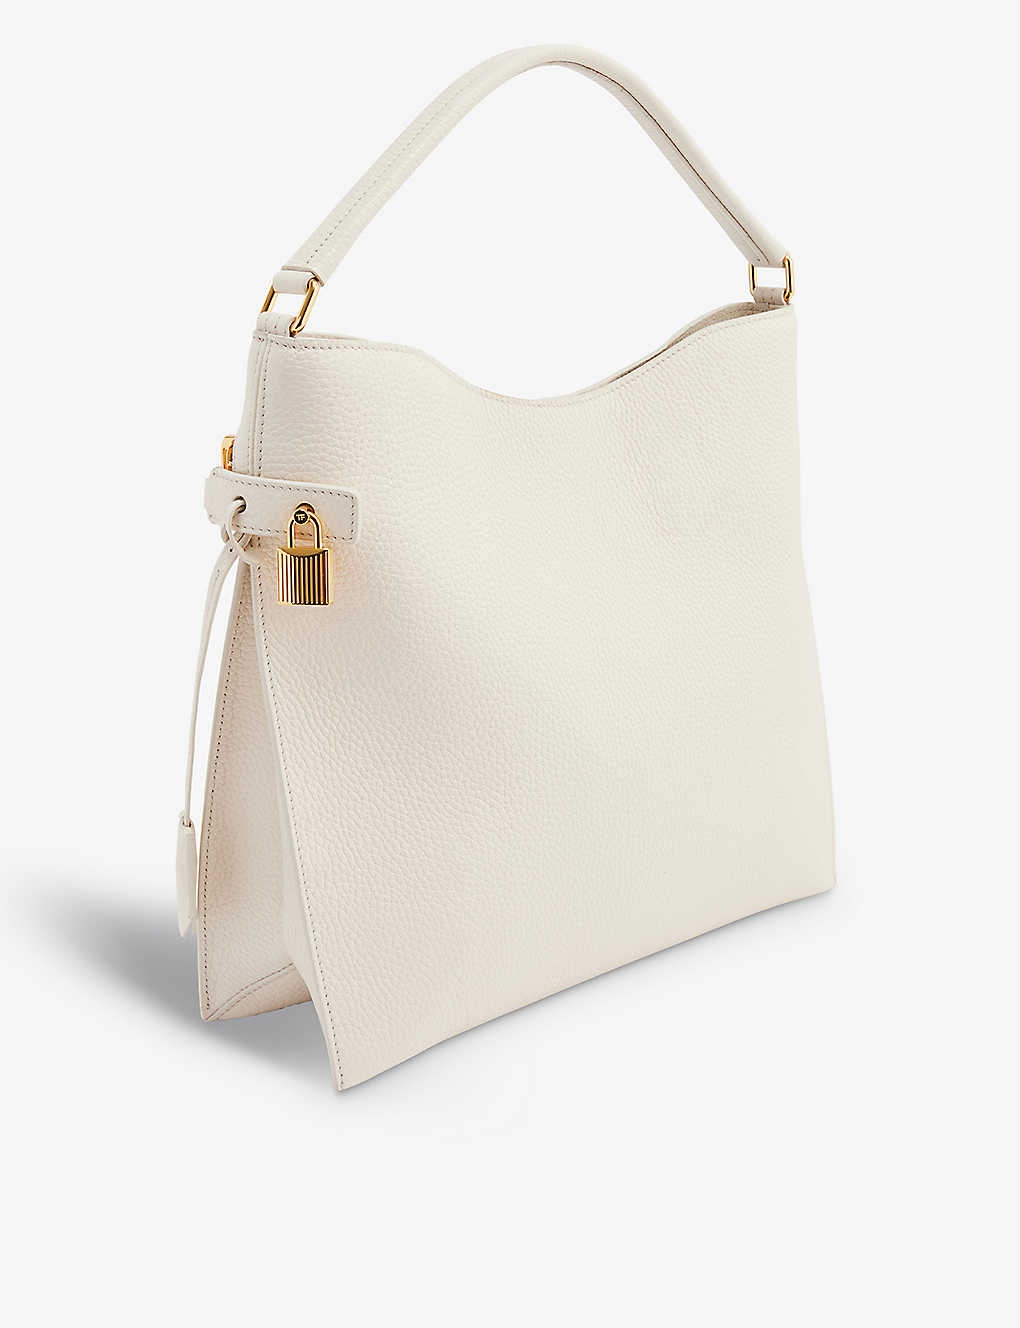 Alix small leather tote bag - 3